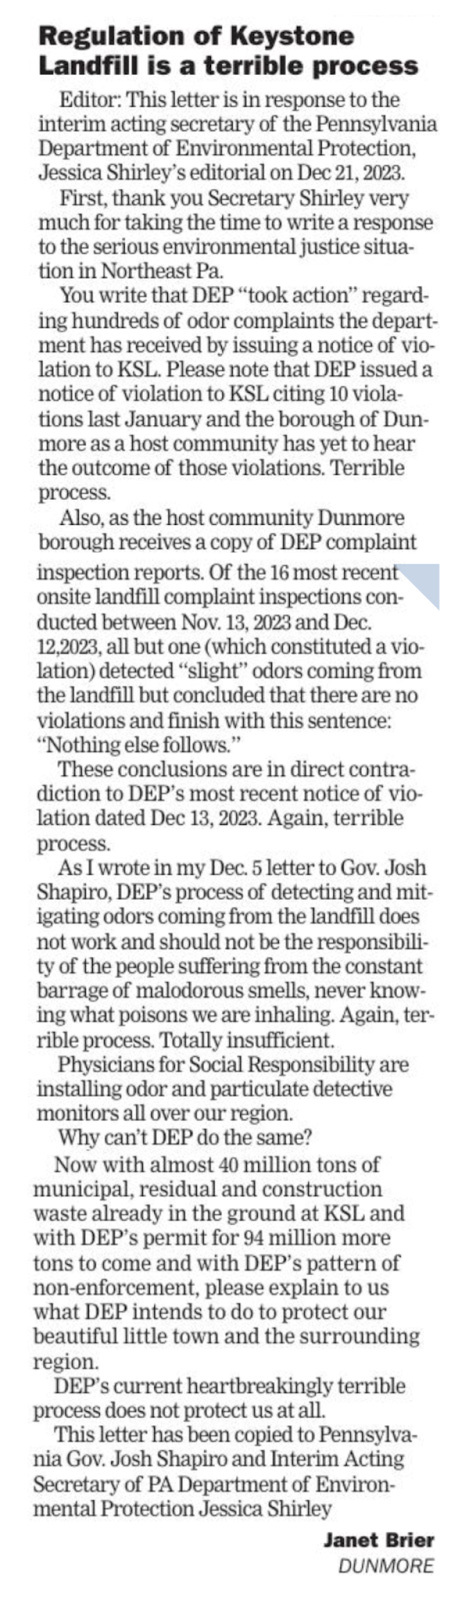 Letter to the Editor in The Times-Tribune in Scranton, PA from Thursday December 28, 2023. Text:  Regulation of Keystone Landfill is a terrible process Editor: This letter is in response to the interim acting secretary of the Pennsylvania Department of Environmental Protection, Jessica Shirley's editorial on Dec 21, 2023. First, thank you Secretary Shirley very much for taking the time to write a response to the serious environmental justice situation in Northeast Pa. You write that DEP "took action" regard- ing hundreds of odor complaints the depart- ment has received by issuing a notice of vio- lation to KSL. Please note that DEP issued a notice of violation to KSL citing 10 violations last January and the borough of Dun- more as a host community has yet to hear the outcome of those violations. Terrible process. Also, as the host community Dunmore borough receives a copy of DEP complaint inspection reports. Of the 16 most recent onsite landfill complaint inspections con- ducted between Nov. 13, 2023 and Dec. 12,2023, all but one (which constituted a violation) detected "slight" odors coming from the landfill but concluded that there are no violations and finish with this sentence: "Nothing else follows." These conclusions are in direct contra- diction to DEP's most recent notice of violation dated Dec 13, 2023. Again, terrible process. As I wrote in my Dec. 5 letter to Gov. Josh Shapiro, DEP's process of detecting and mitigating odors coming from the landfill does not work and should not be the responsibility of the people suffering from the constant barrage of malodorous smells, never know- ing what poisons we are inhaling. Again, terrible process. Totally insufficient. Physicians for Social Responsibility are installing odor and particulate detective monitors all over our region. Why can't DEP do the same? Now with almost 40 million tons of municipal, residual and construction waste already in the ground at KSL and with DEP's permit for 94 million more tons to come and with DEP's pattern of non-enforcement, please explain to us what DEP intends to do to protect our beautiful little town and the surrounding region. DEP's current heartbreakingly terrible process does not protect us at all. This letter has been copied to Pennsylvania Gov. Josh Shapiro and Interim Acting Secretary of PA Department of Environmental Protection Jessica Shirley Janet Brier DUNMORE